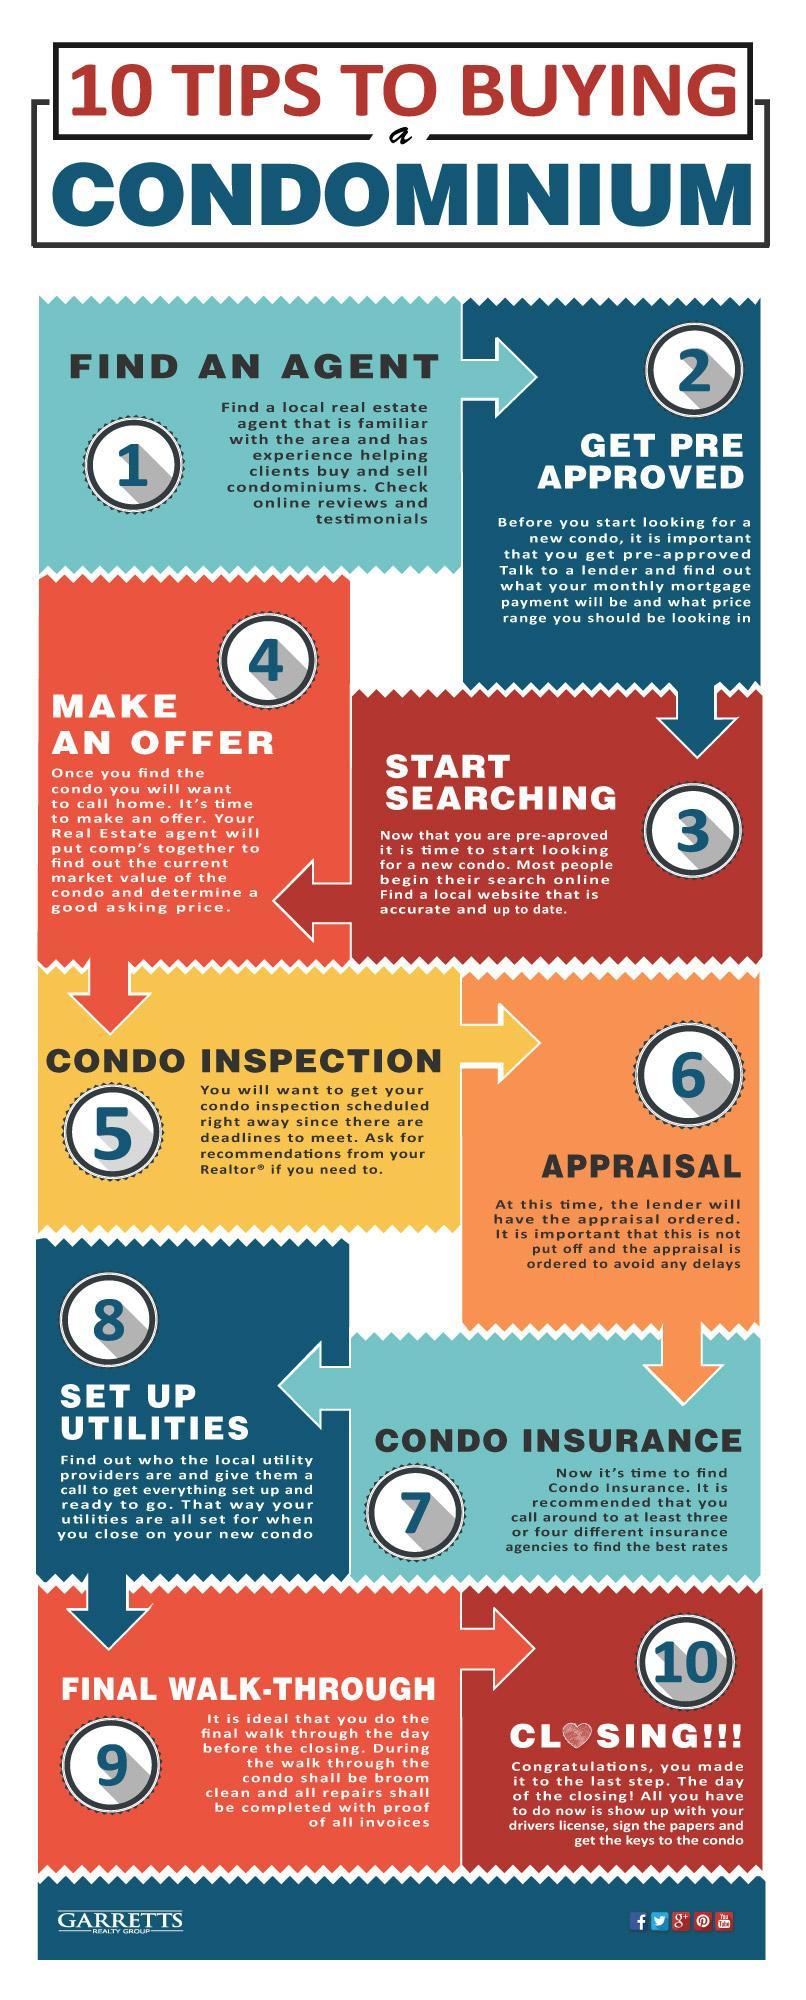 How to Buy a Condo: 10 Essential Tips to Get You Started [INFOGRAPHIC]